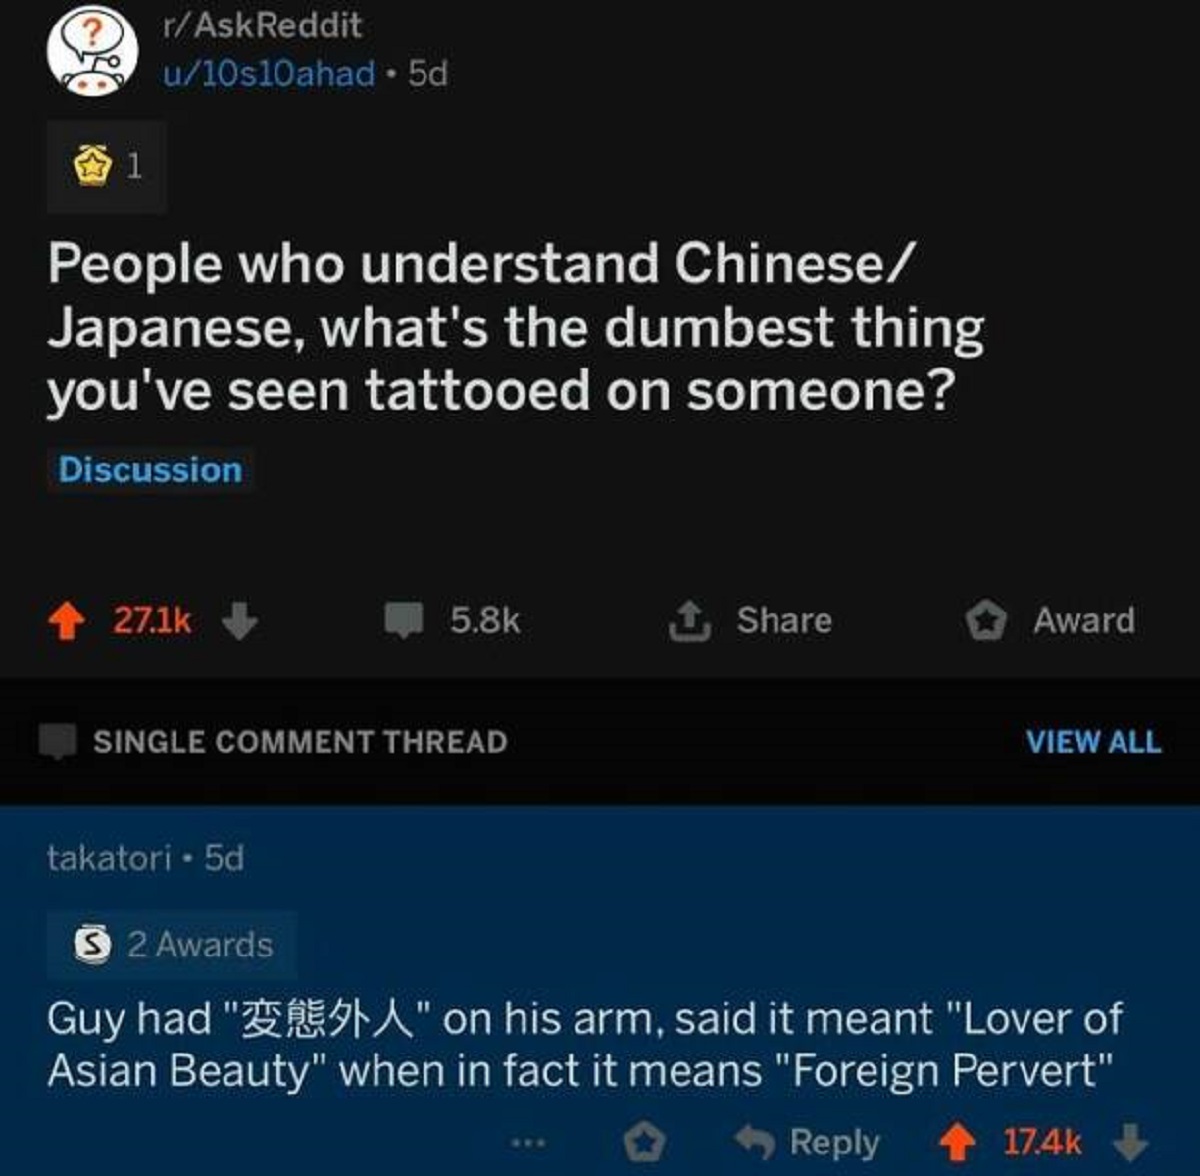 screenshot - rAskReddit u10s10ahad 5d People who understand Chinese Japanese, what's the dumbest thing you've seen tattooed on someone? Discussion Award Single Comment Thread View All takatori 5d S2 Awards Guy had "A" on his arm, said it meant "Lover of A